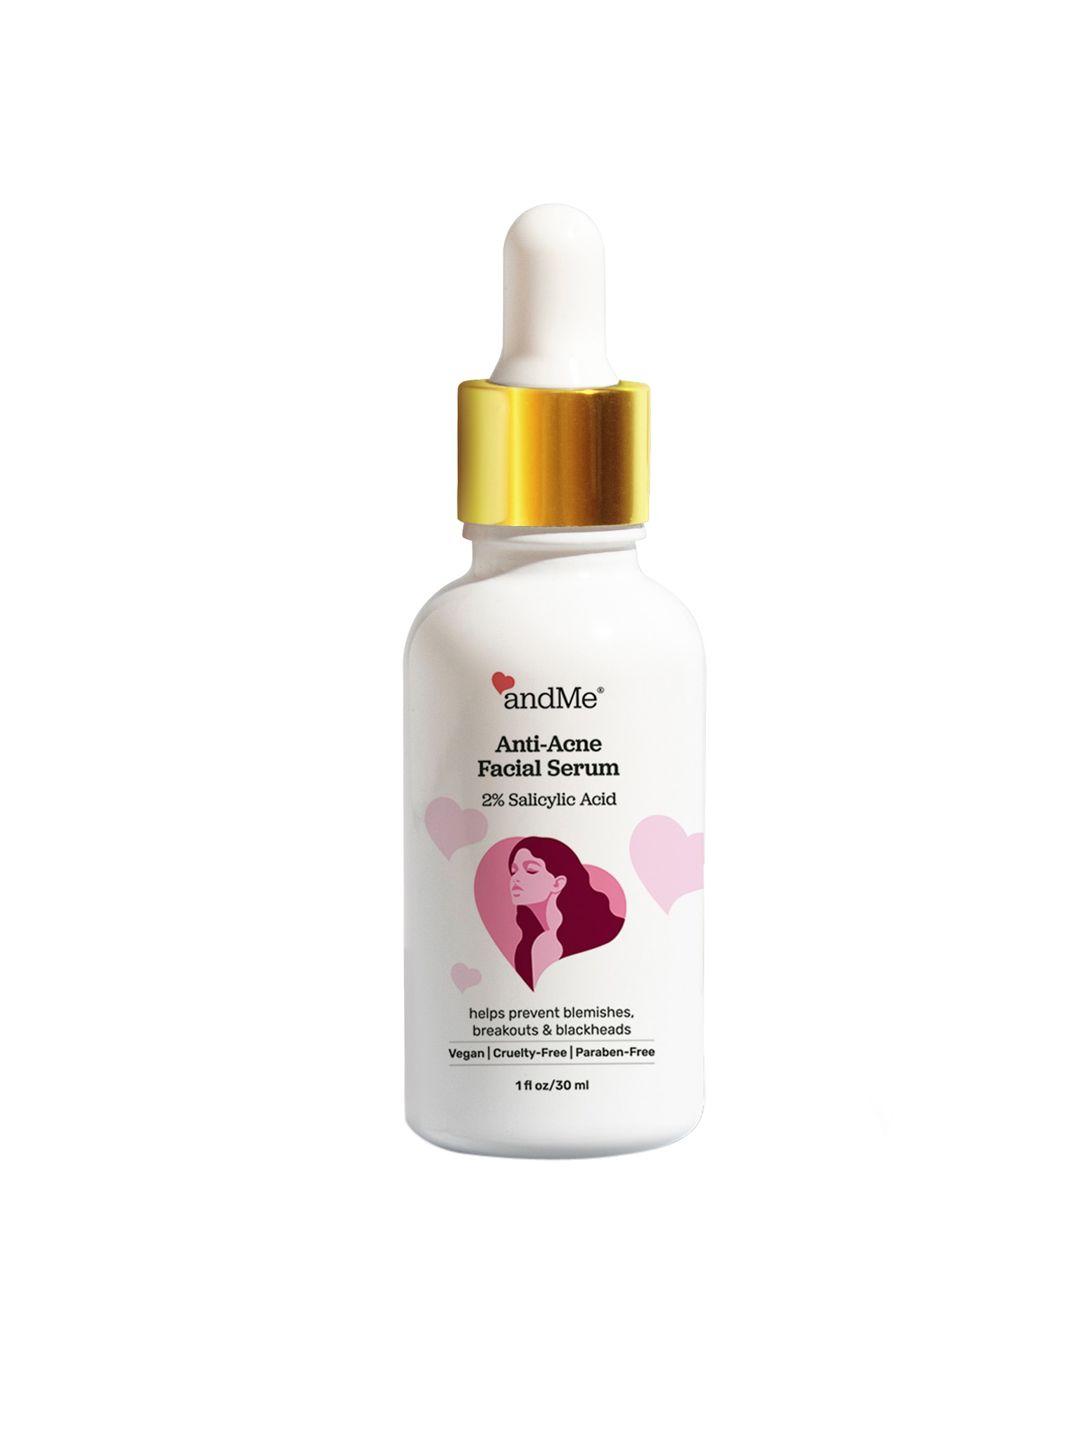 andme 2% salicylic acid anti-acne facial serum to prevent blemishes & breakouts - 30 ml